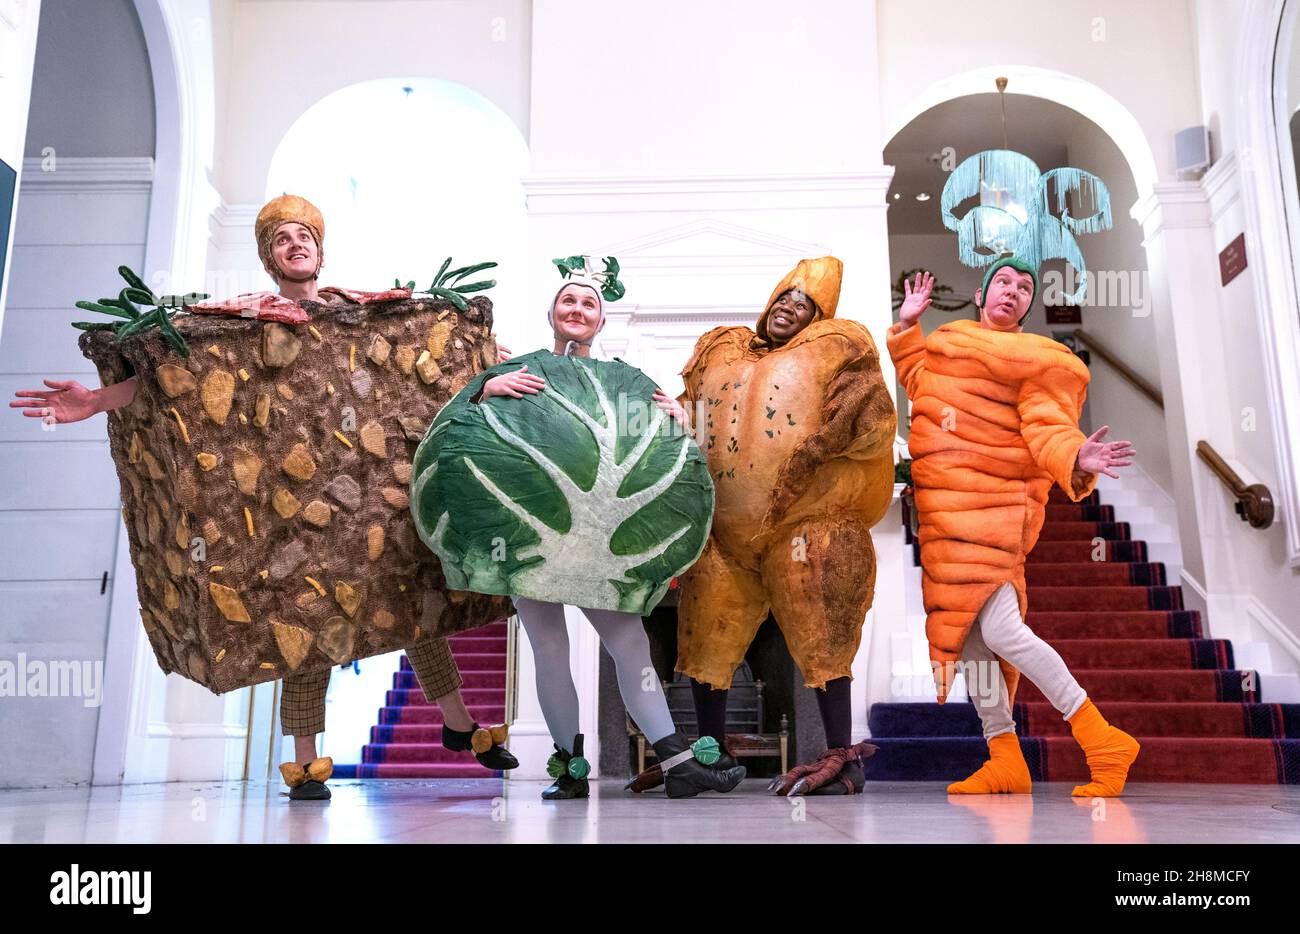 Cast members (from left) Ronan McMahon, Sita Pieraccini, Florence Odumosu and Richard Conlon get into character ahead of their show 'Christmas Dinner' at the Lyceum Theatre, Edinburgh, which will run from 6 December 2021 - 2 January 2022. Picture date: Tuesday November 30, 2021. Stock Photo